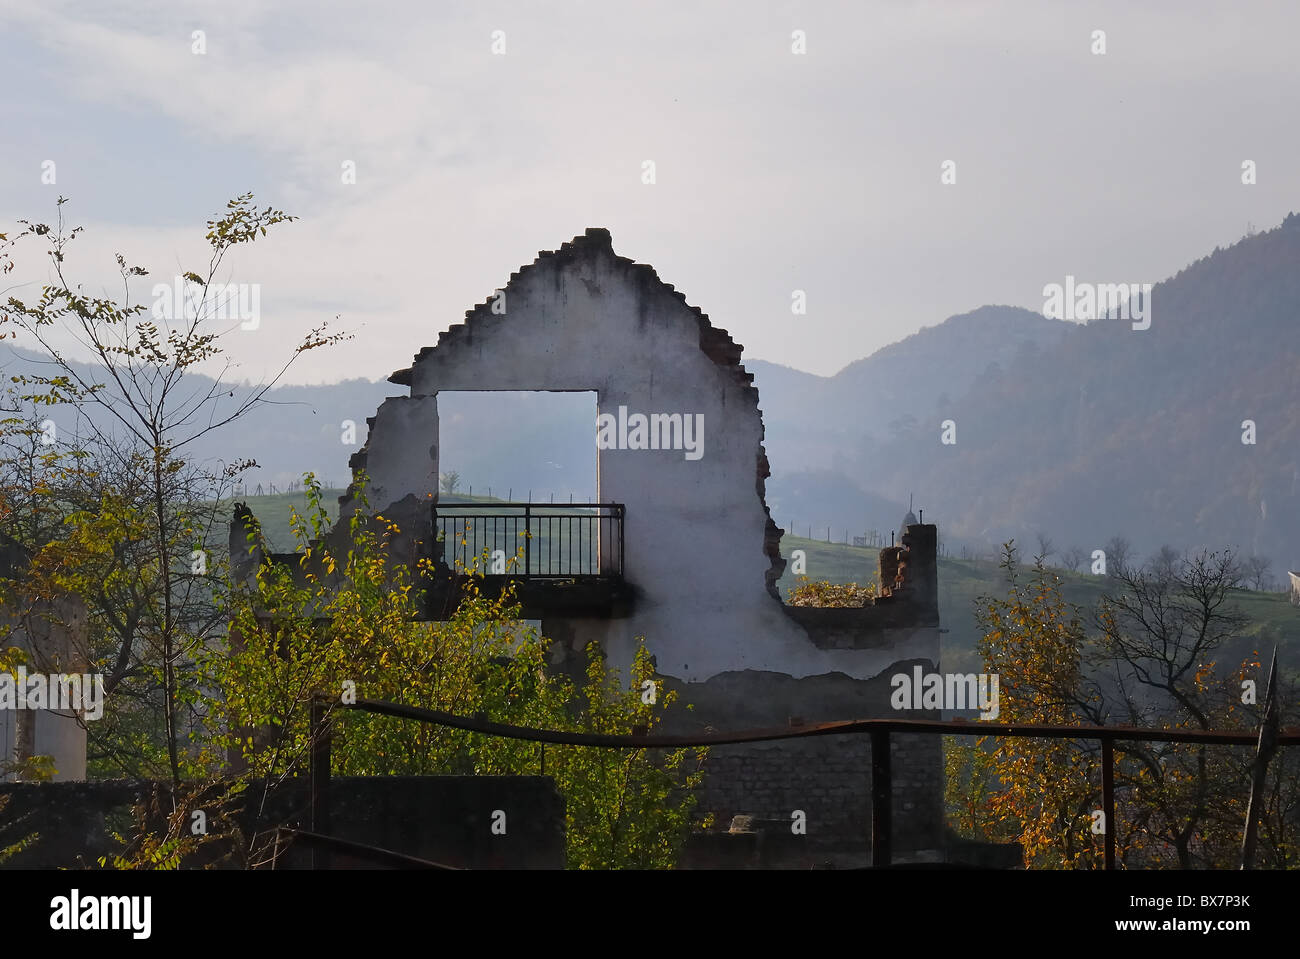 Visegrad, muslim houses destroyed by the members of the White Eagles, Serbian paramilitary group. Stock Photo